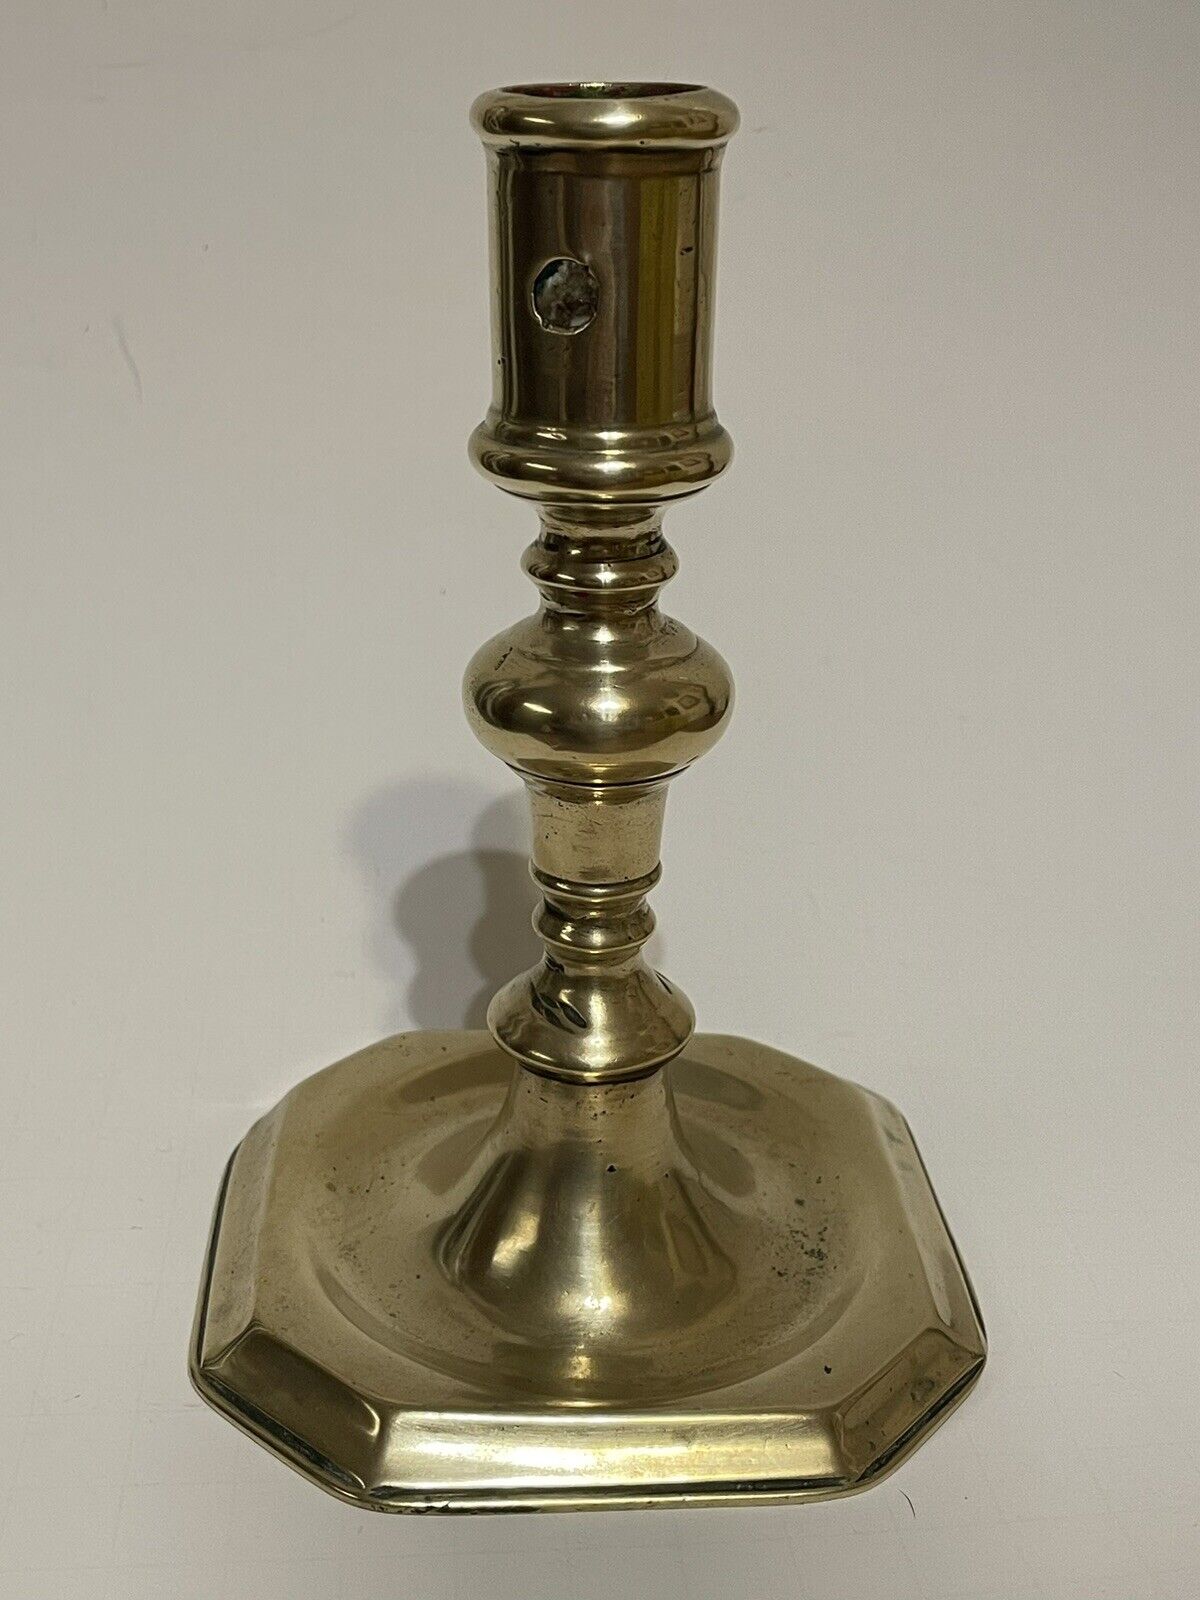 Late 17th c. ca 1690 antique French brass candlestick